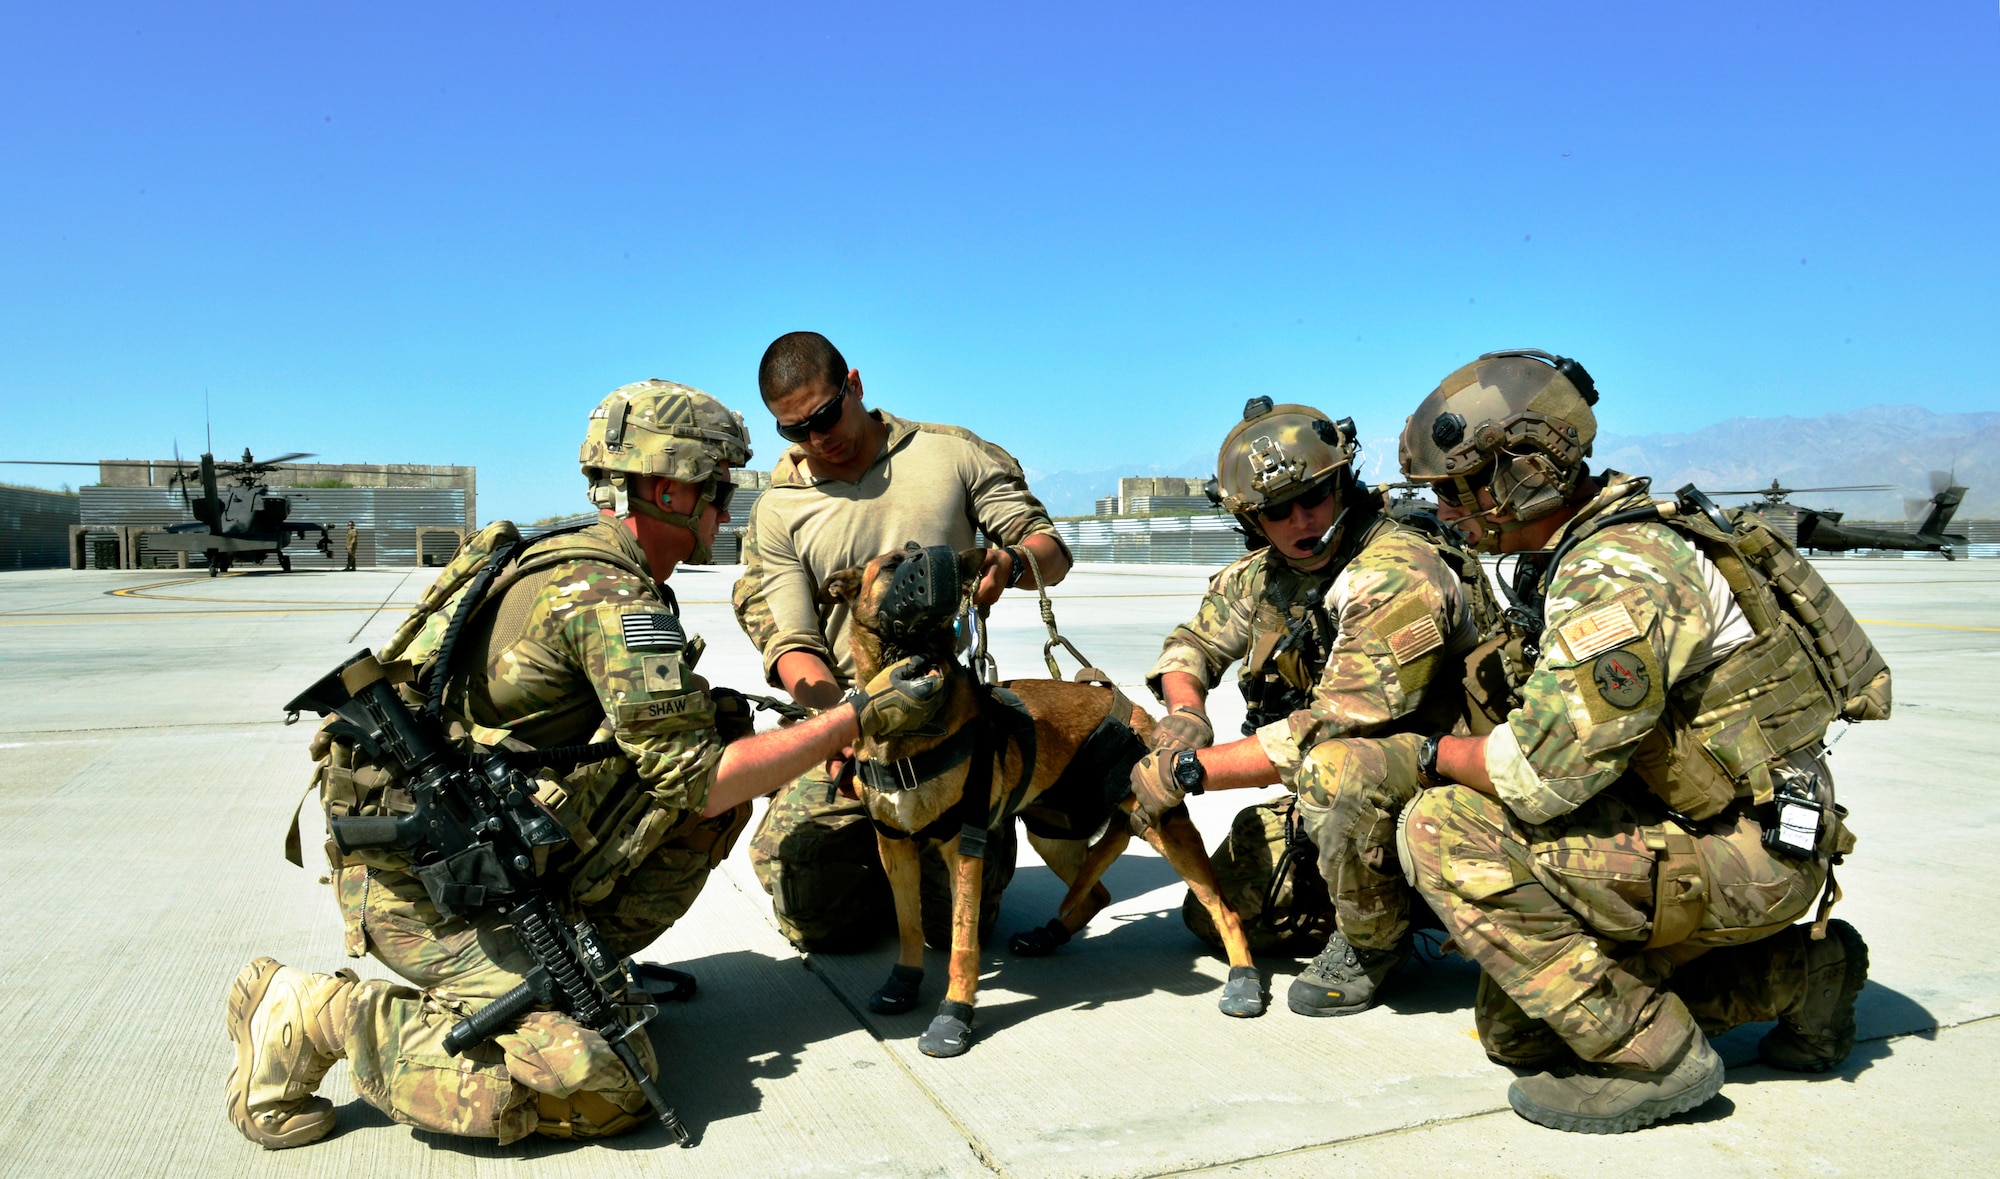 Pararescuemen assigned to the 83rd Expeditionary Rescue Squadron and Specialist Matthew Shaw, prepare an U.S. Army tactical explosive detection dog to be hoist into an HH-60G Pave Hawk helicopter during a rescue training at Bagram Airfield, Afghanistan, June 21. More than 15 U.S. Army TED dogs and their handlers participated in the training  This is the first time the 83rd RQS has participated in dog rescue training with the U.S. Army here. (U.S. Air Force photo/ Staff Sgt. Stephenie Wade)